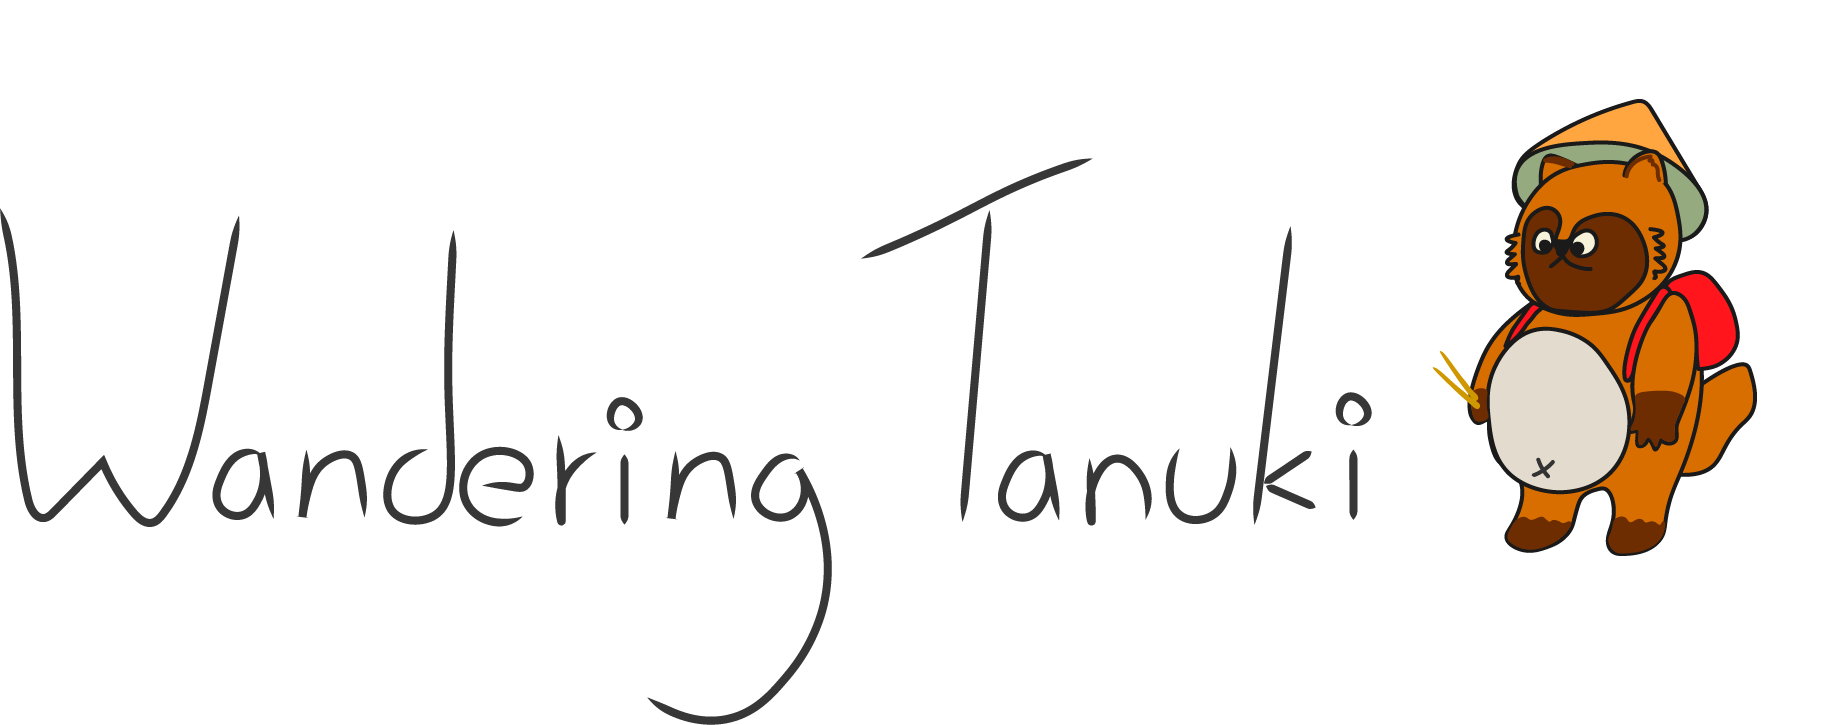 Wanderingtanuki Let S Learn About Japanese Language And Culture